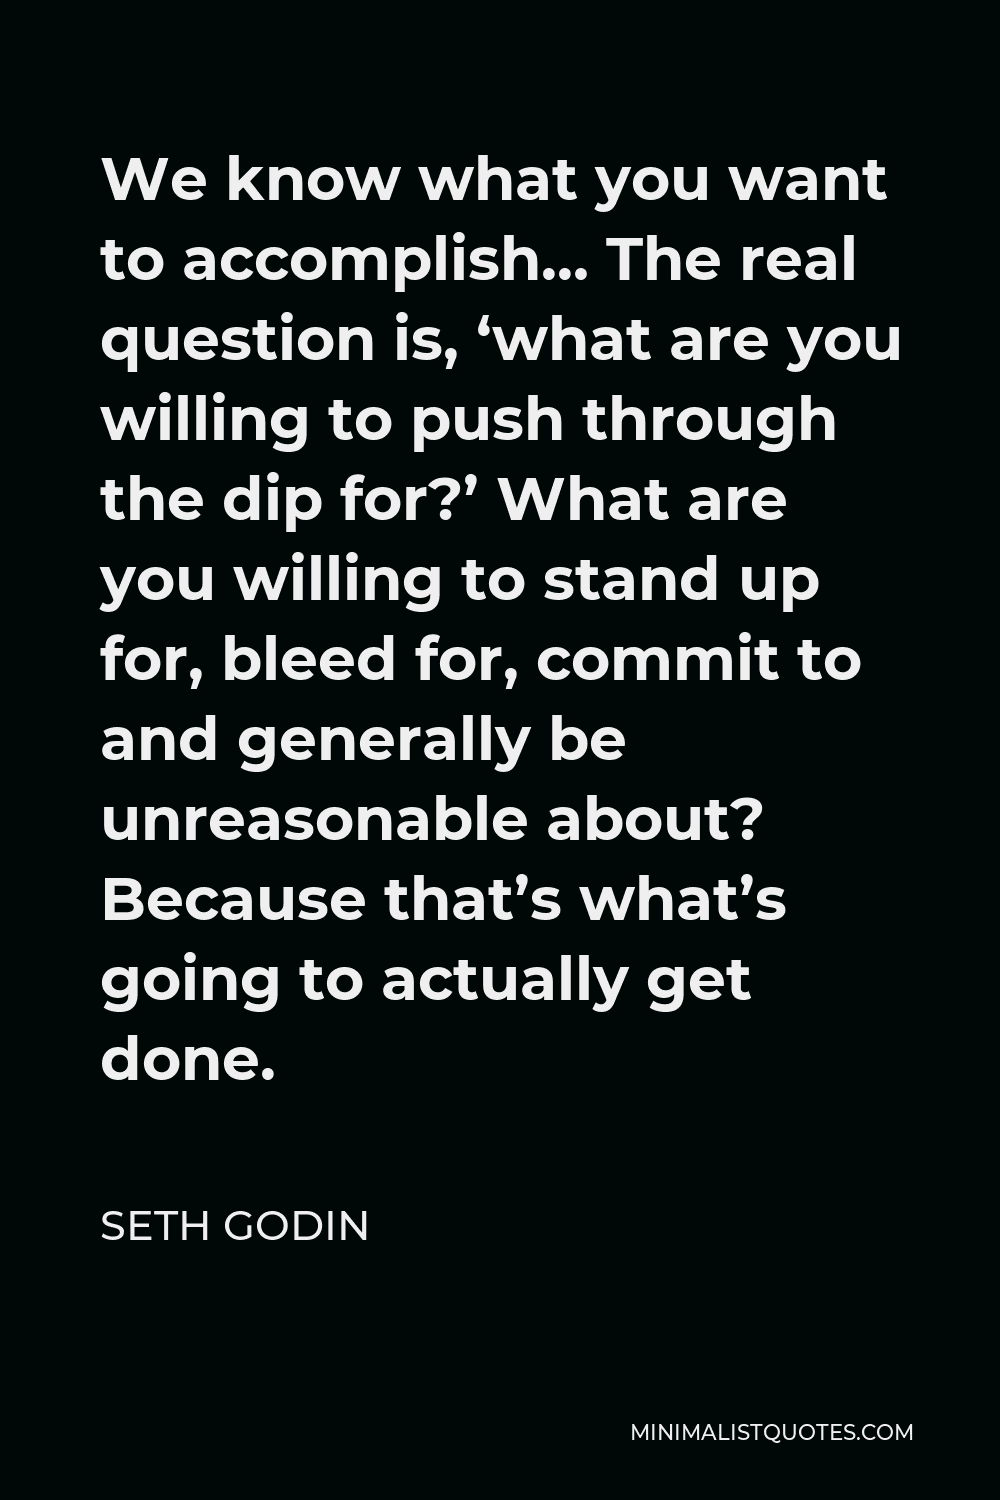 Seth Godin Quote - We know what you want to accomplish… The real question is, ‘what are you willing to push through the dip for?’ What are you willing to stand up for, bleed for, commit to and generally be unreasonable about? Because that’s what’s going to actually get done.